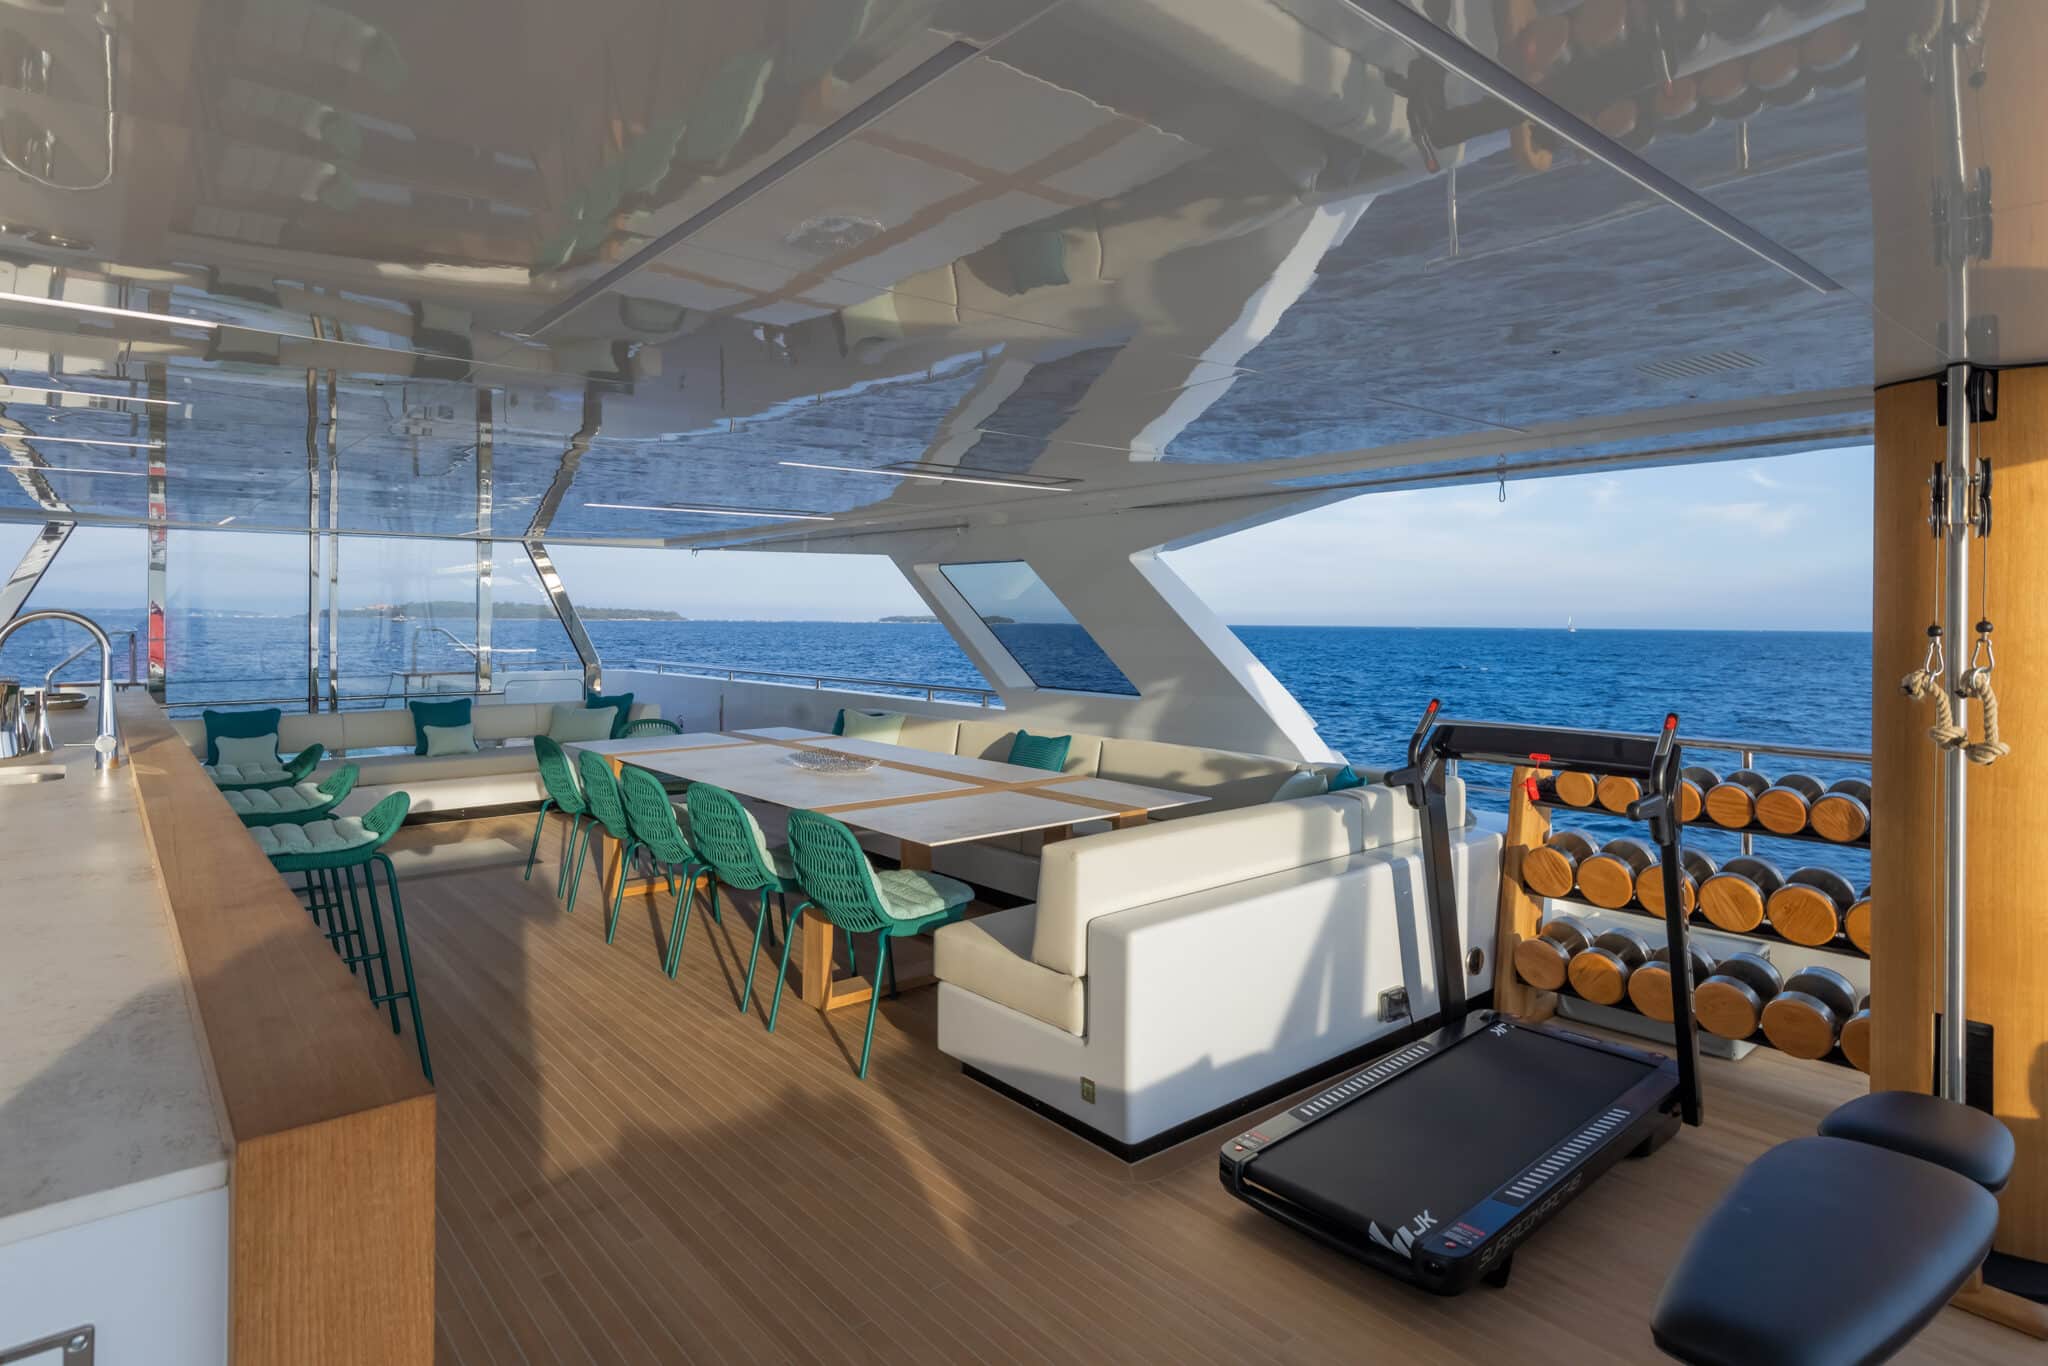 Emocean by Rosetti Super Yacht  - RSY 38M EXP EMOCEAN Sundeck 01 scaled 61